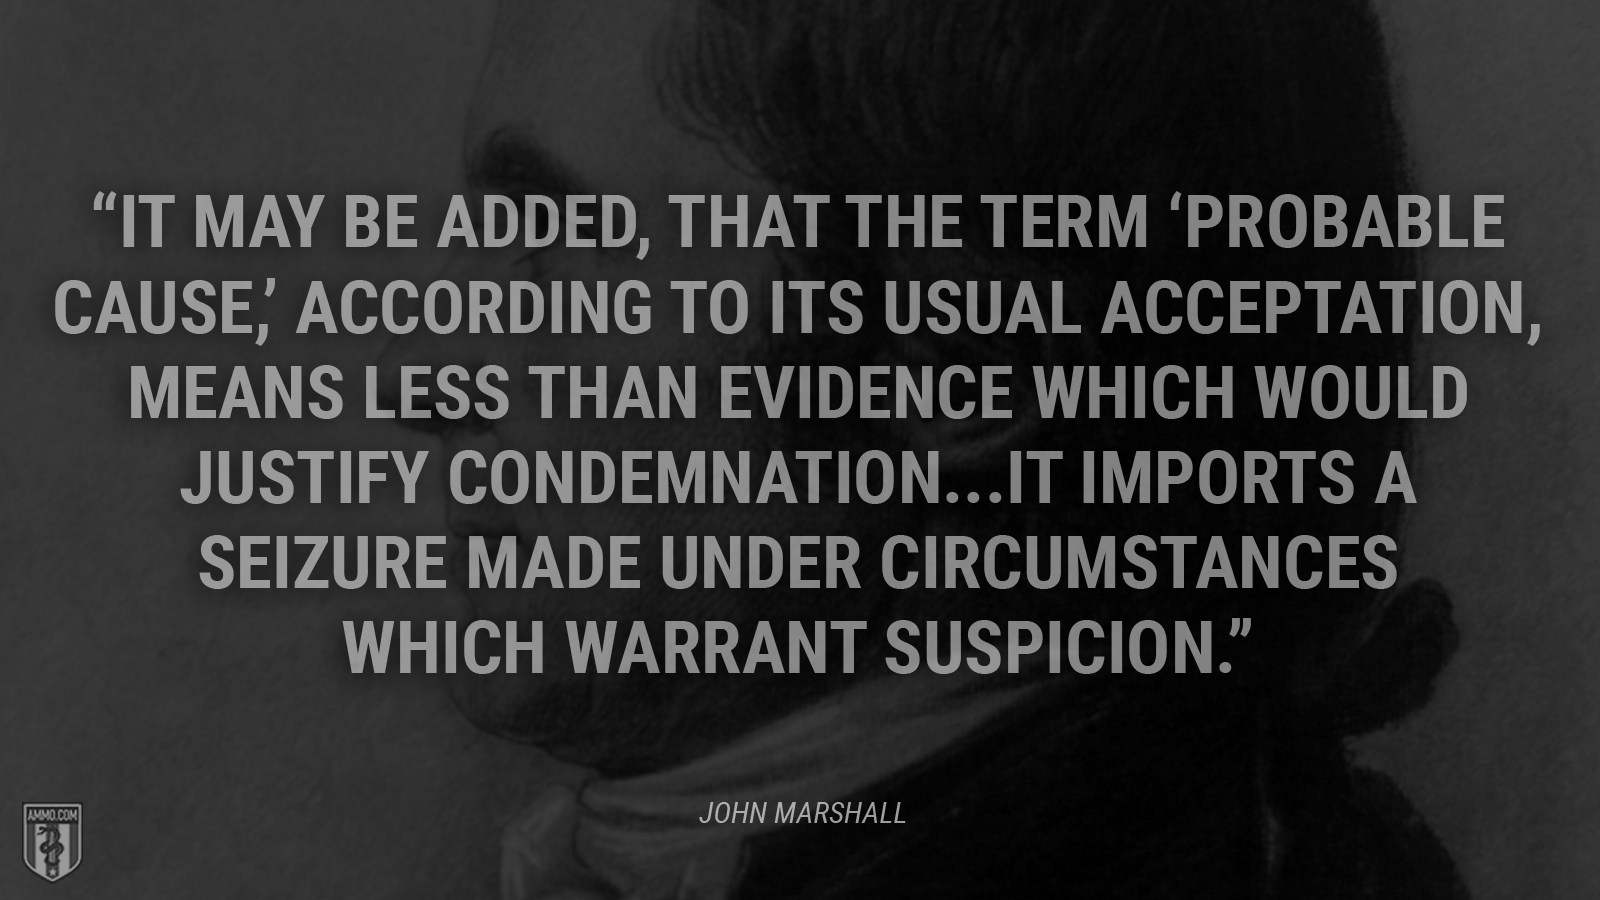 “It may be added, that the term “probable cause,” according to its usual acceptation, means less than evidence which would justify condemnation...It imports a seizure made under circumstances which warrant suspicion.” - John Marshall